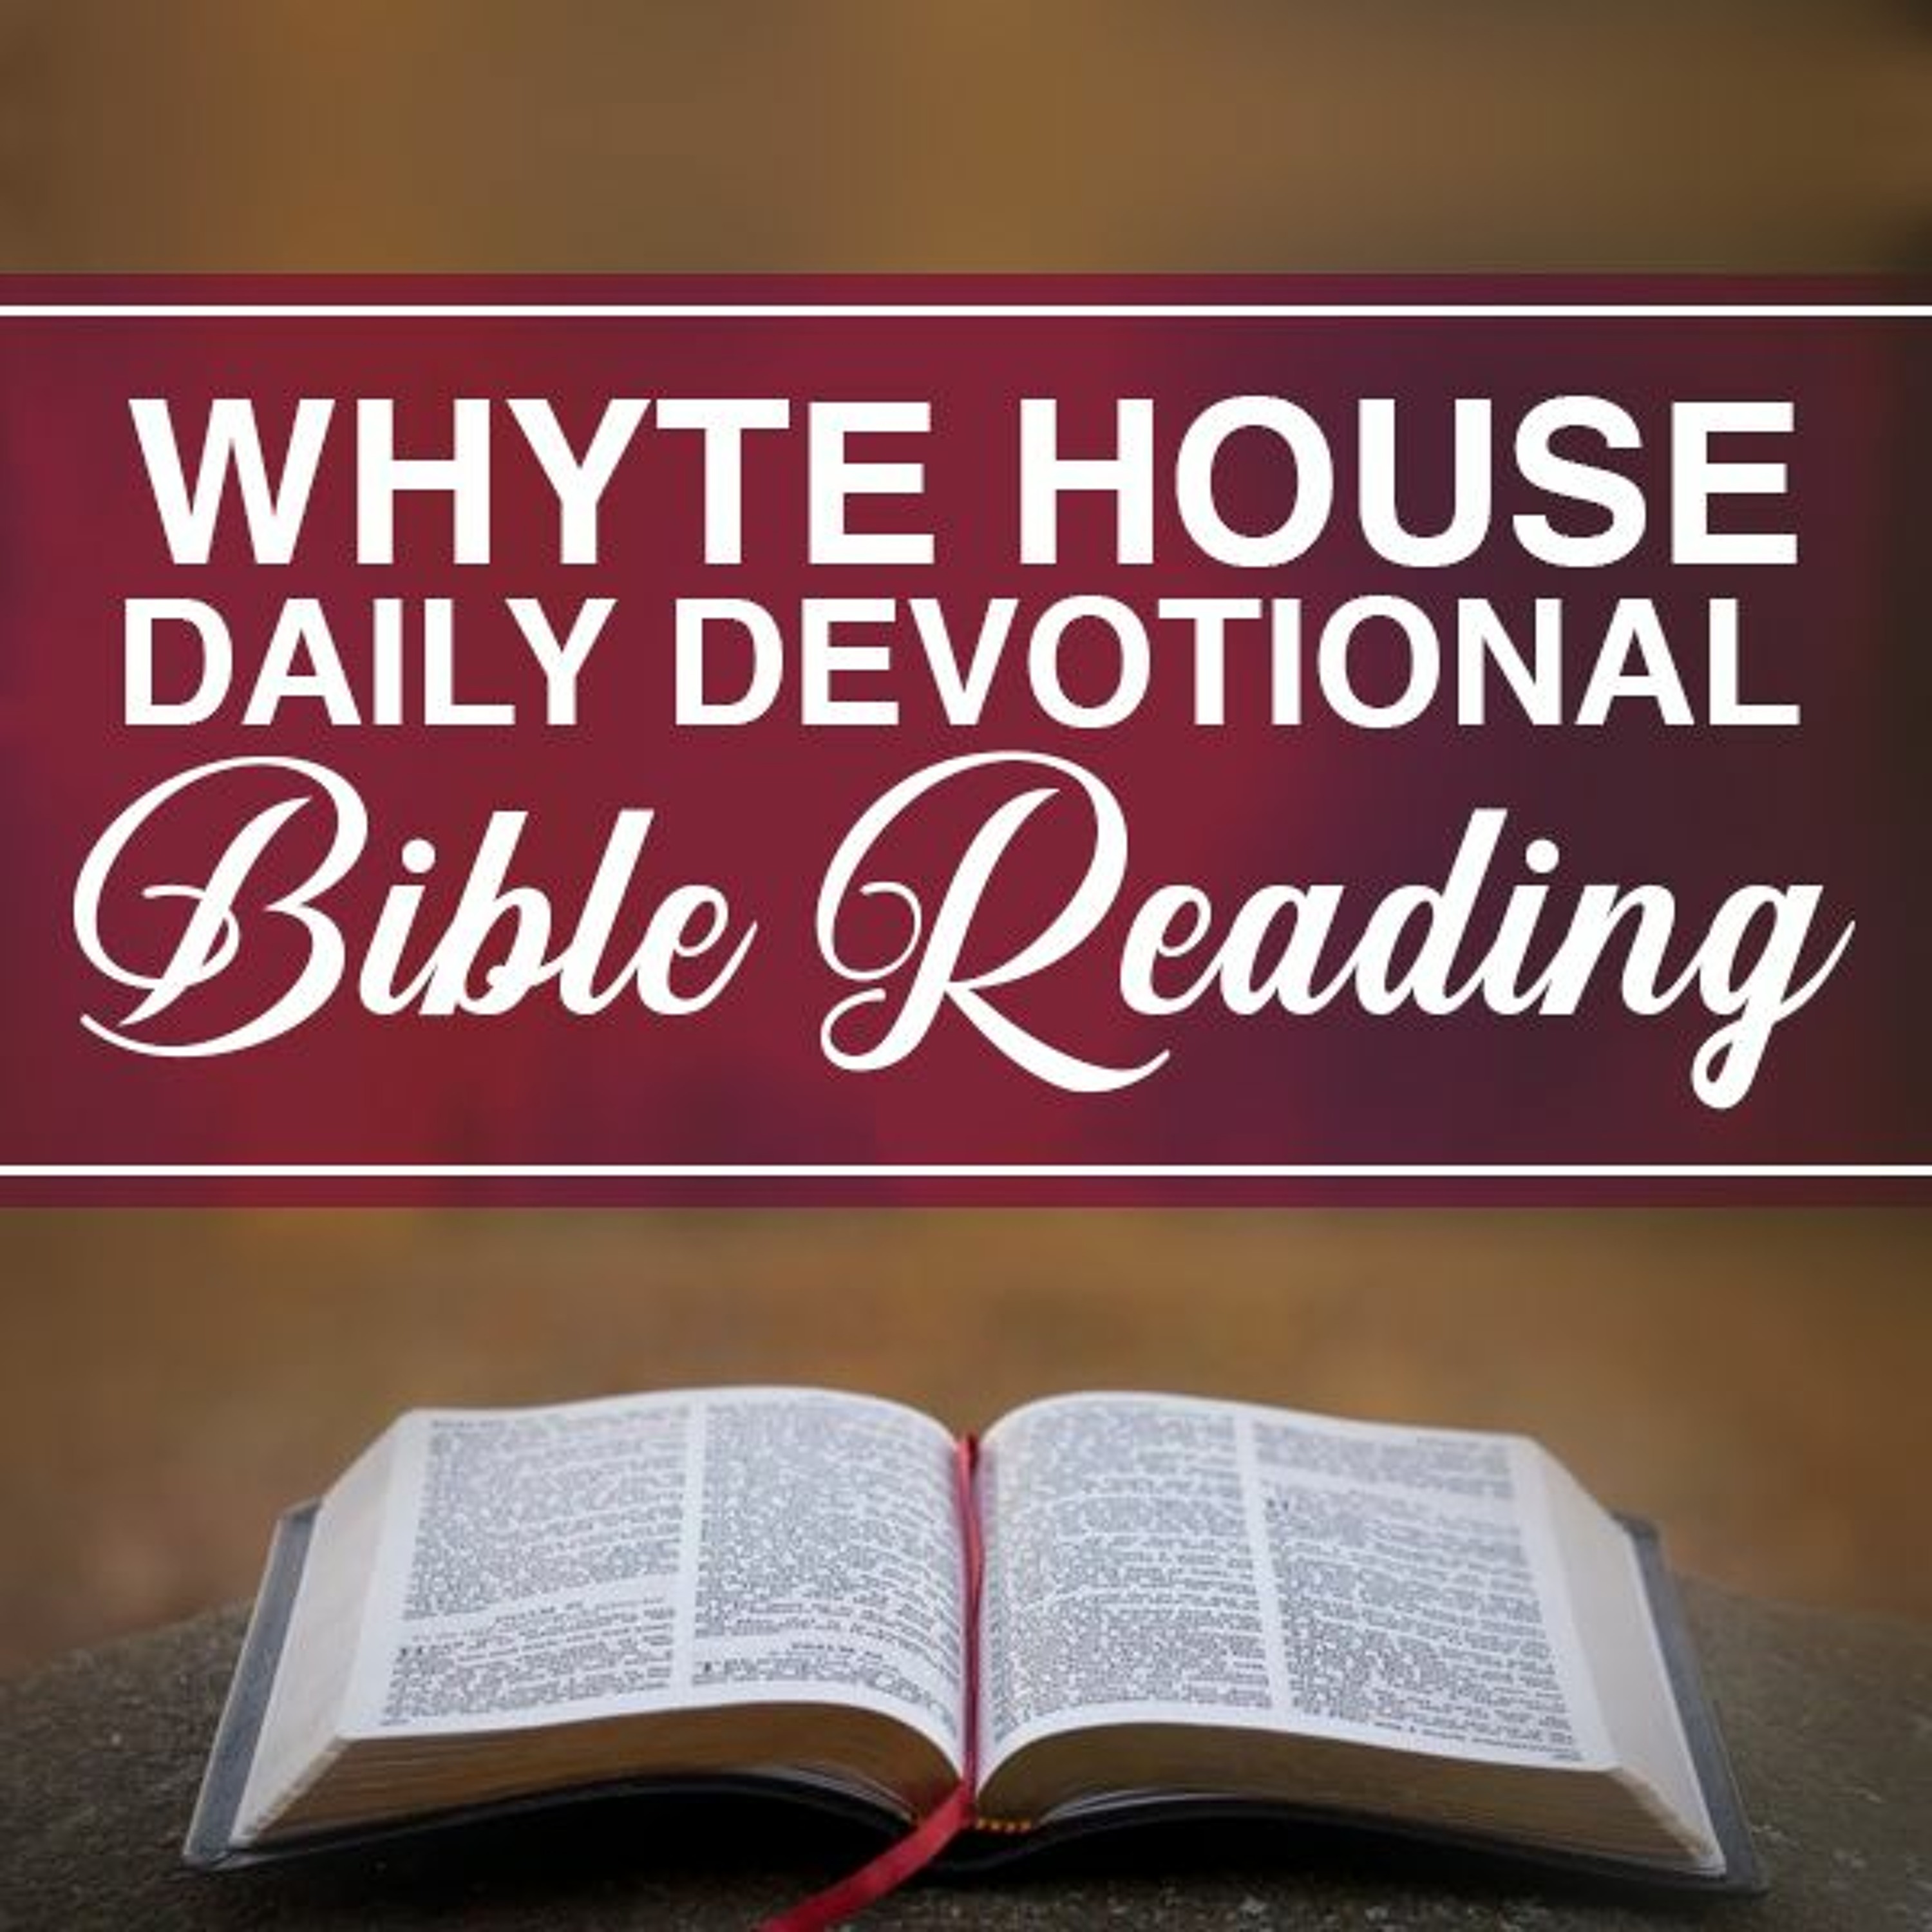 Whyte House Daily Reading of the Chronological Bible #710: 2 Chronicles 15:1-9